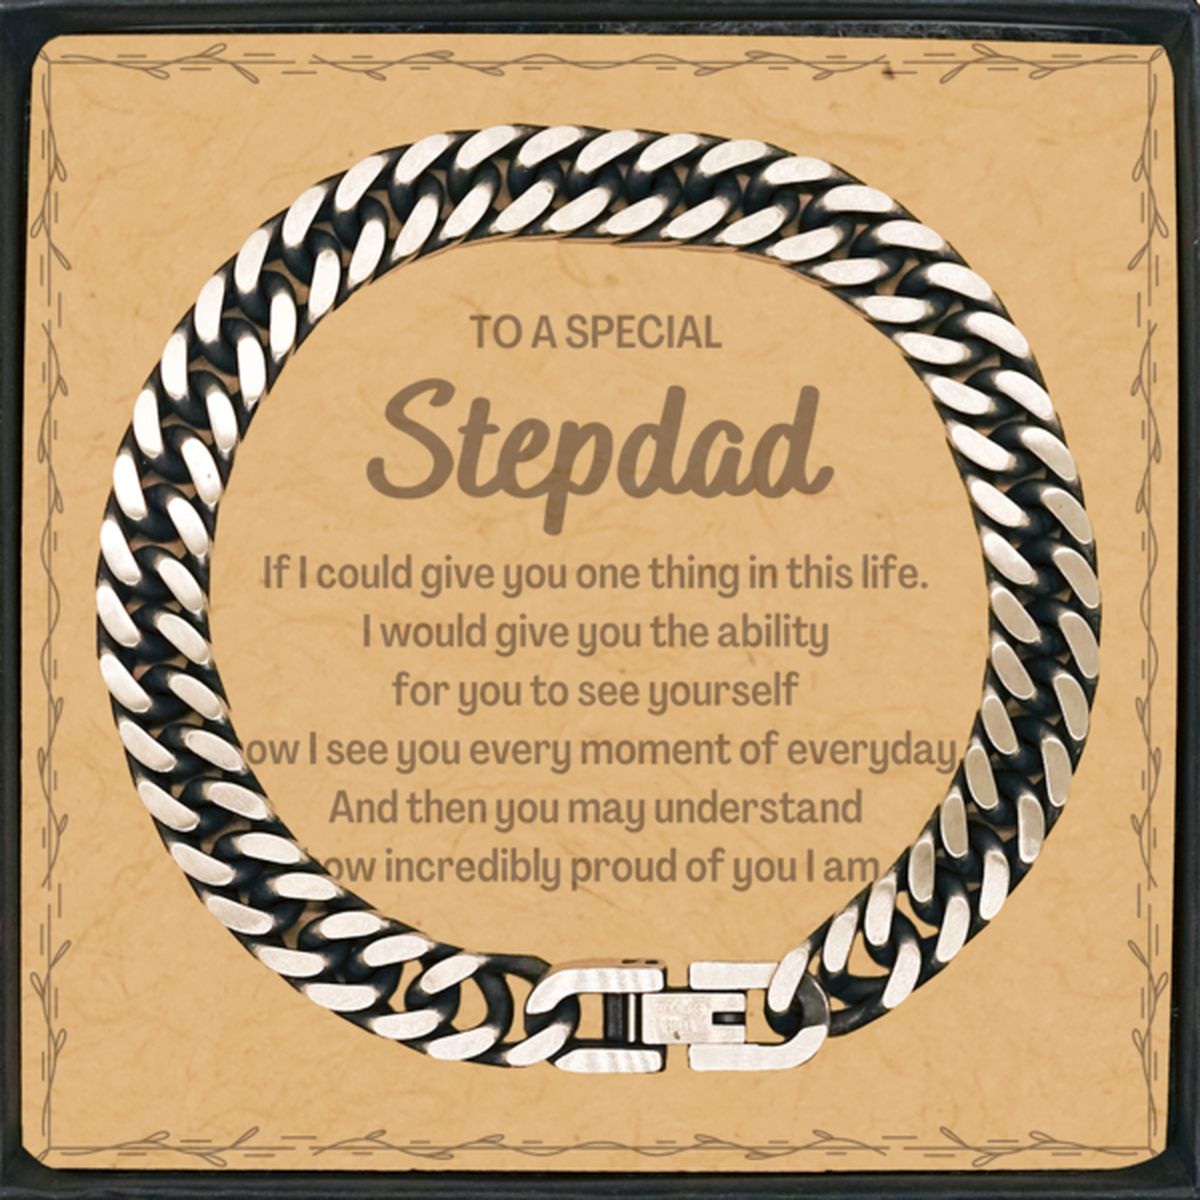 To My Stepdad Cuban Link Chain Bracelet, Gifts For Stepdad Message Card, Inspirational Gifts for Christmas Birthday, Epic Gifts for Stepdad To A Special Stepdad how incredibly proud of you I am